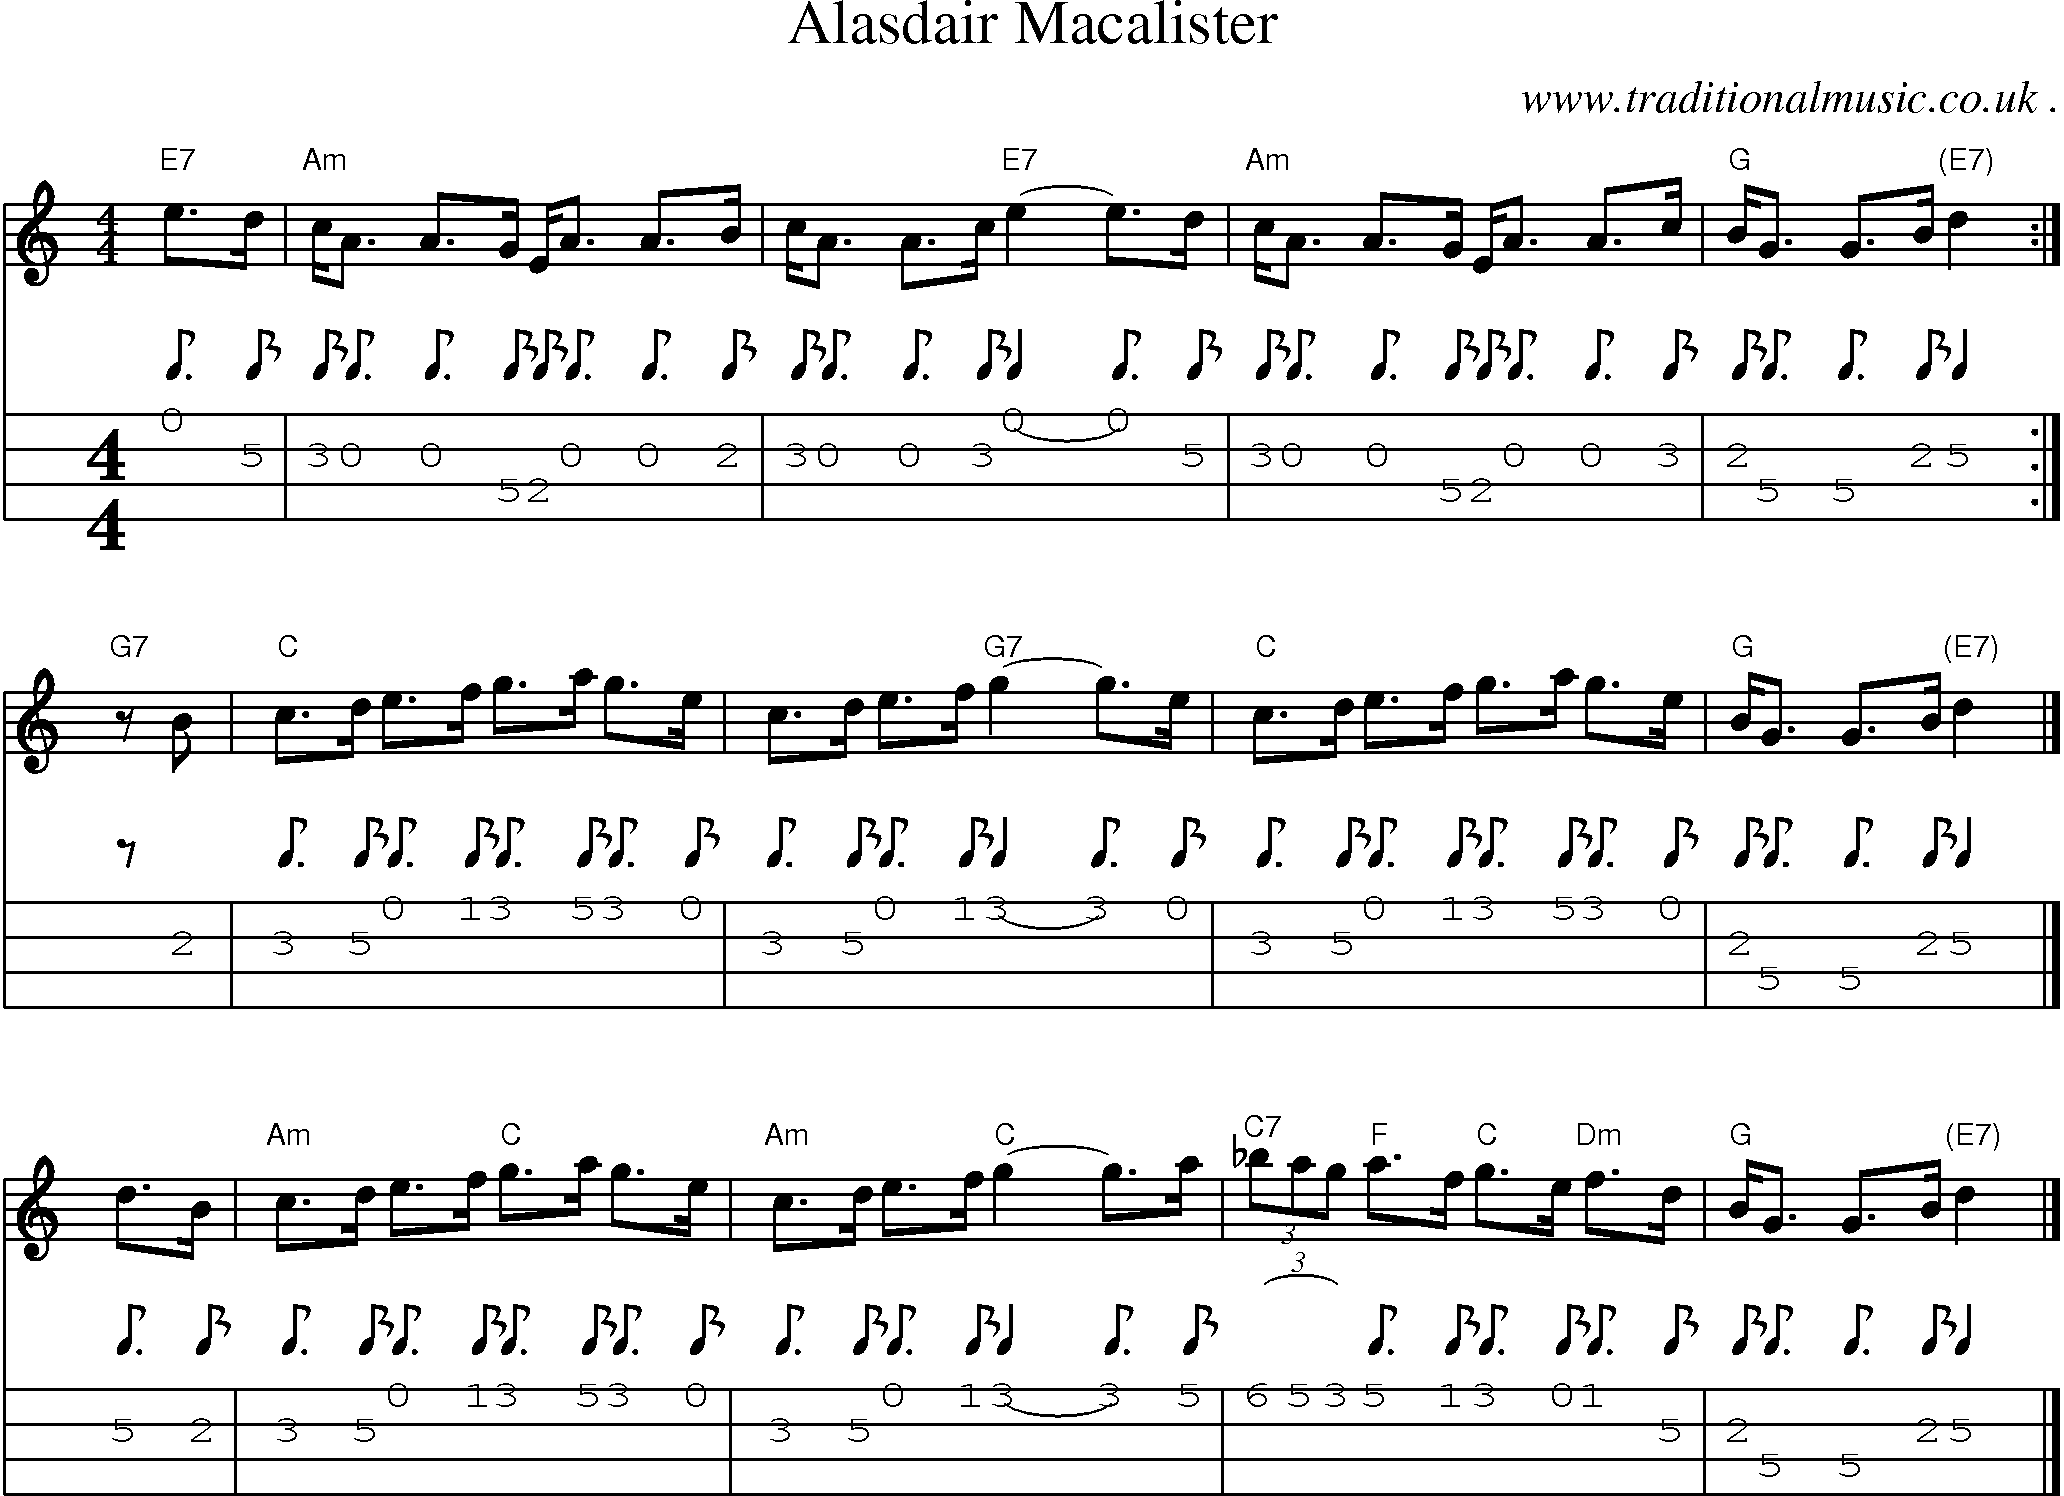 Sheet-music  score, Chords and Mandolin Tabs for Alasdair Macalister